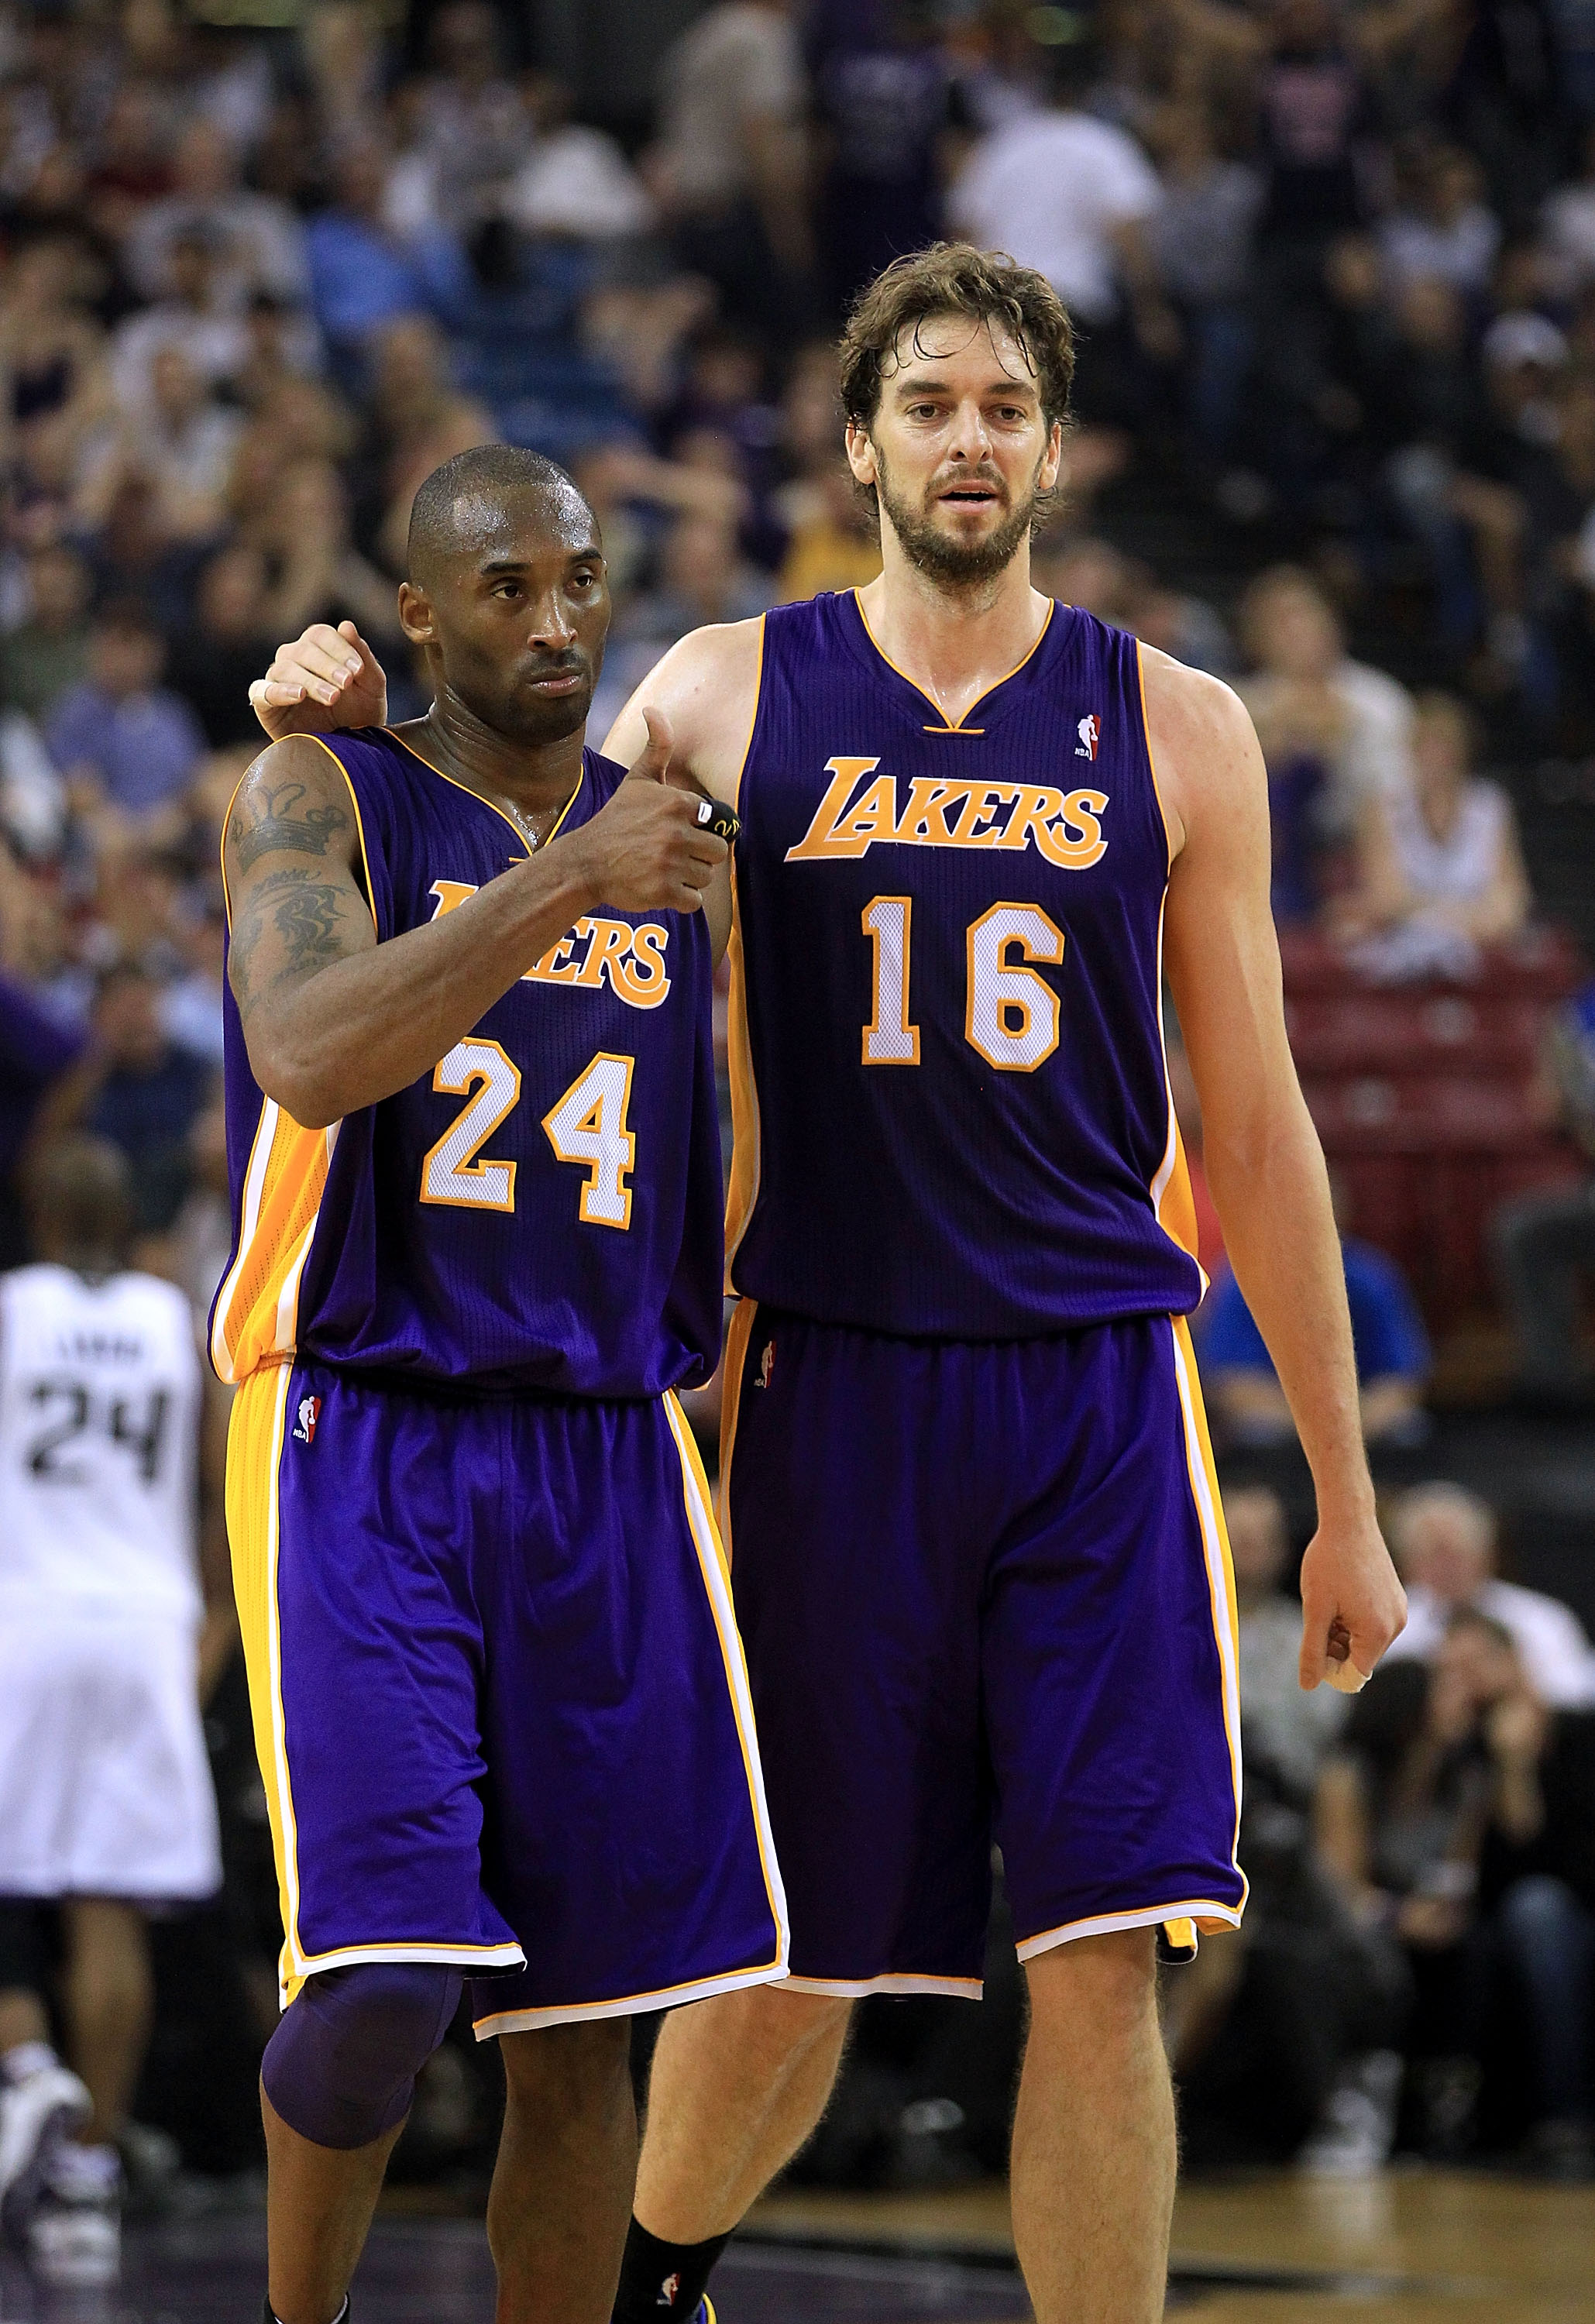 SACRAMENTO, CA - NOVEMBER 03:  Kobe Bryant #24 and Pau Gasol #16 of the Los Angeles Lakers walk off the court for halftime after the Lakers made a last second shot against the Sacramento Kings at ARCO Arena on November 3, 2010 in Sacramento, California.